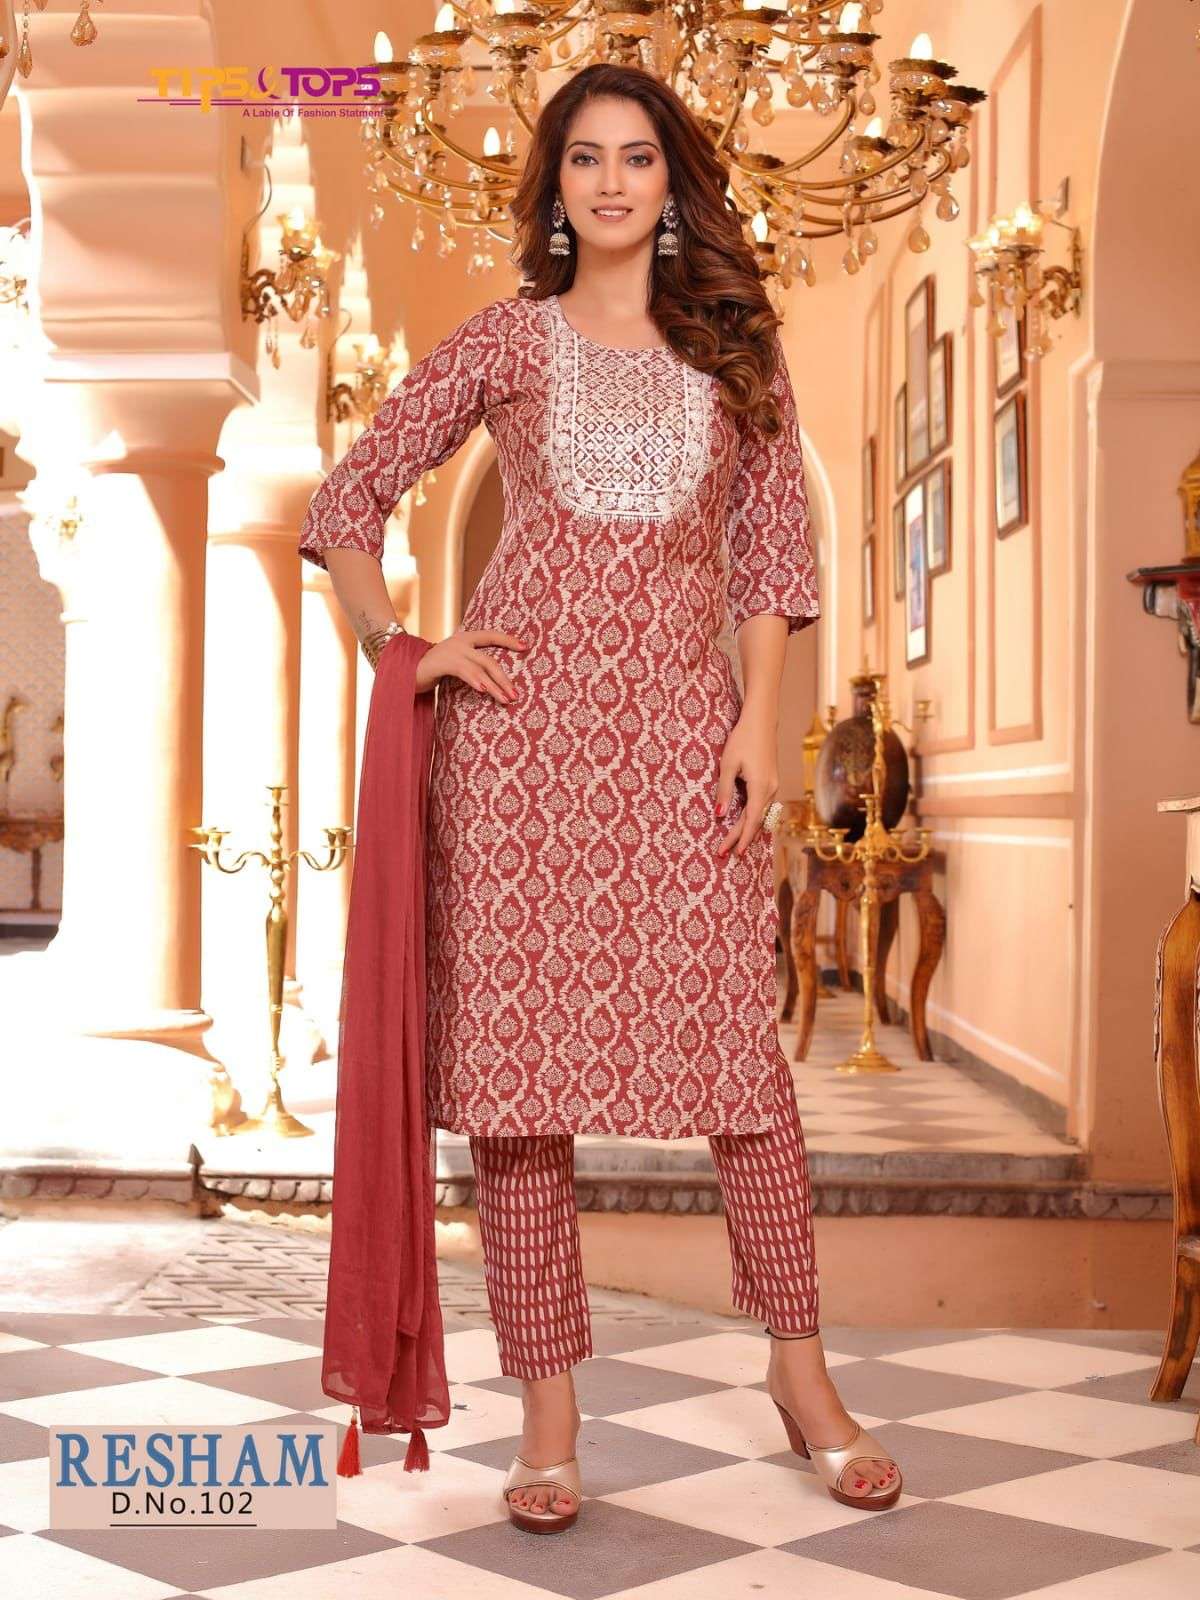 tips and tops resham 101-105 series modal chanderi with fancy work full stich collection surat